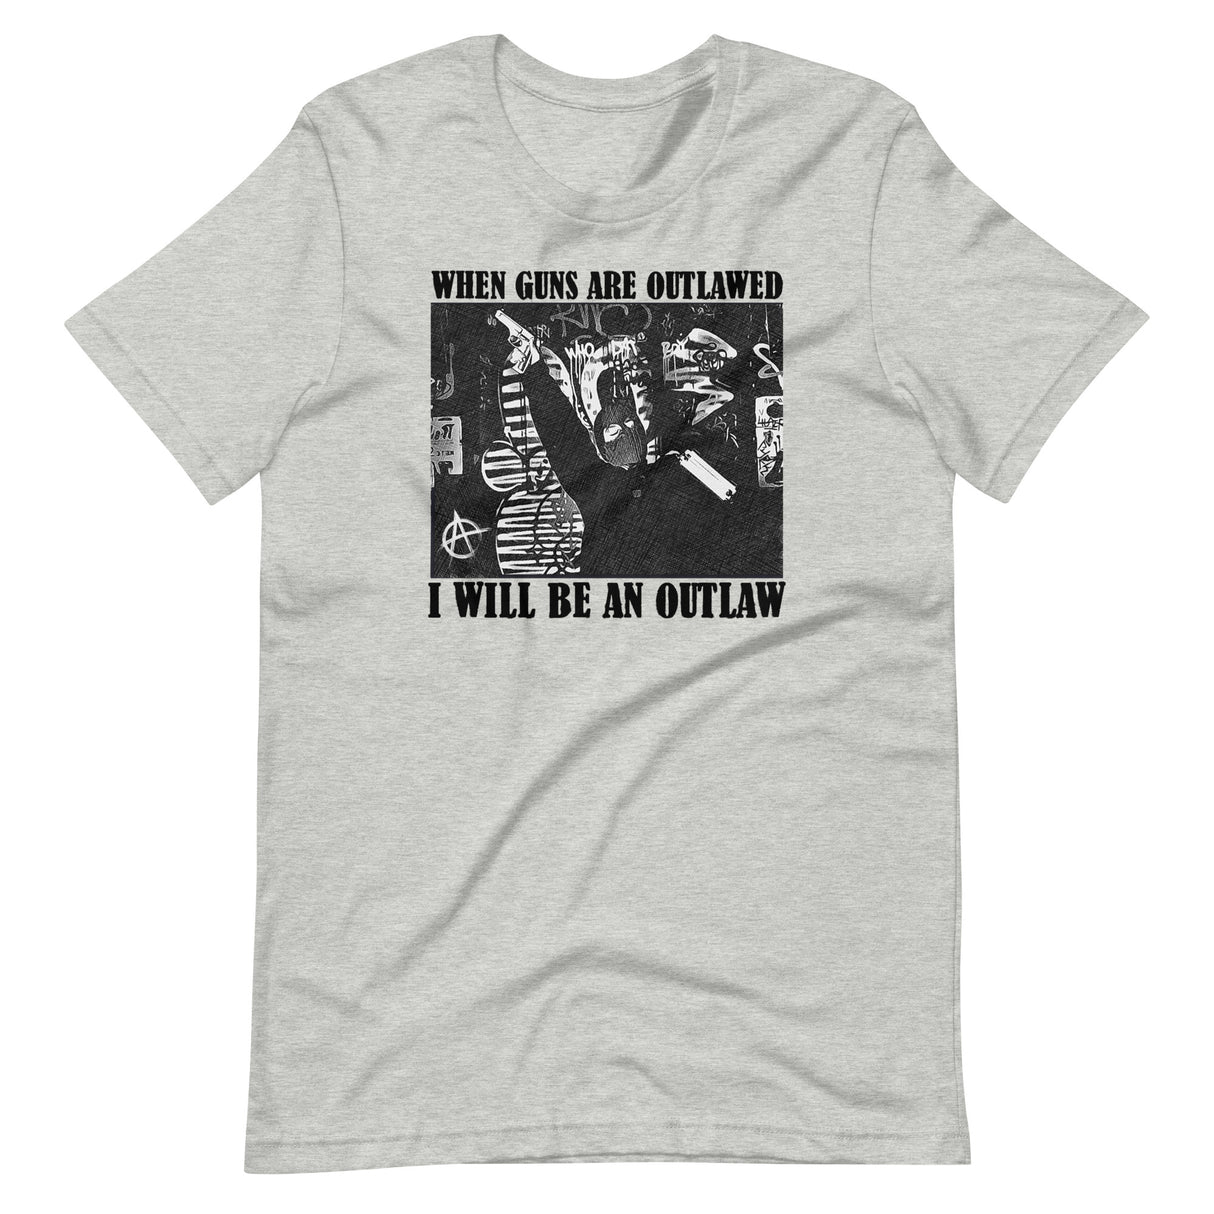 When Guns Are Outlawed I Will Be an Outlaw Shirt